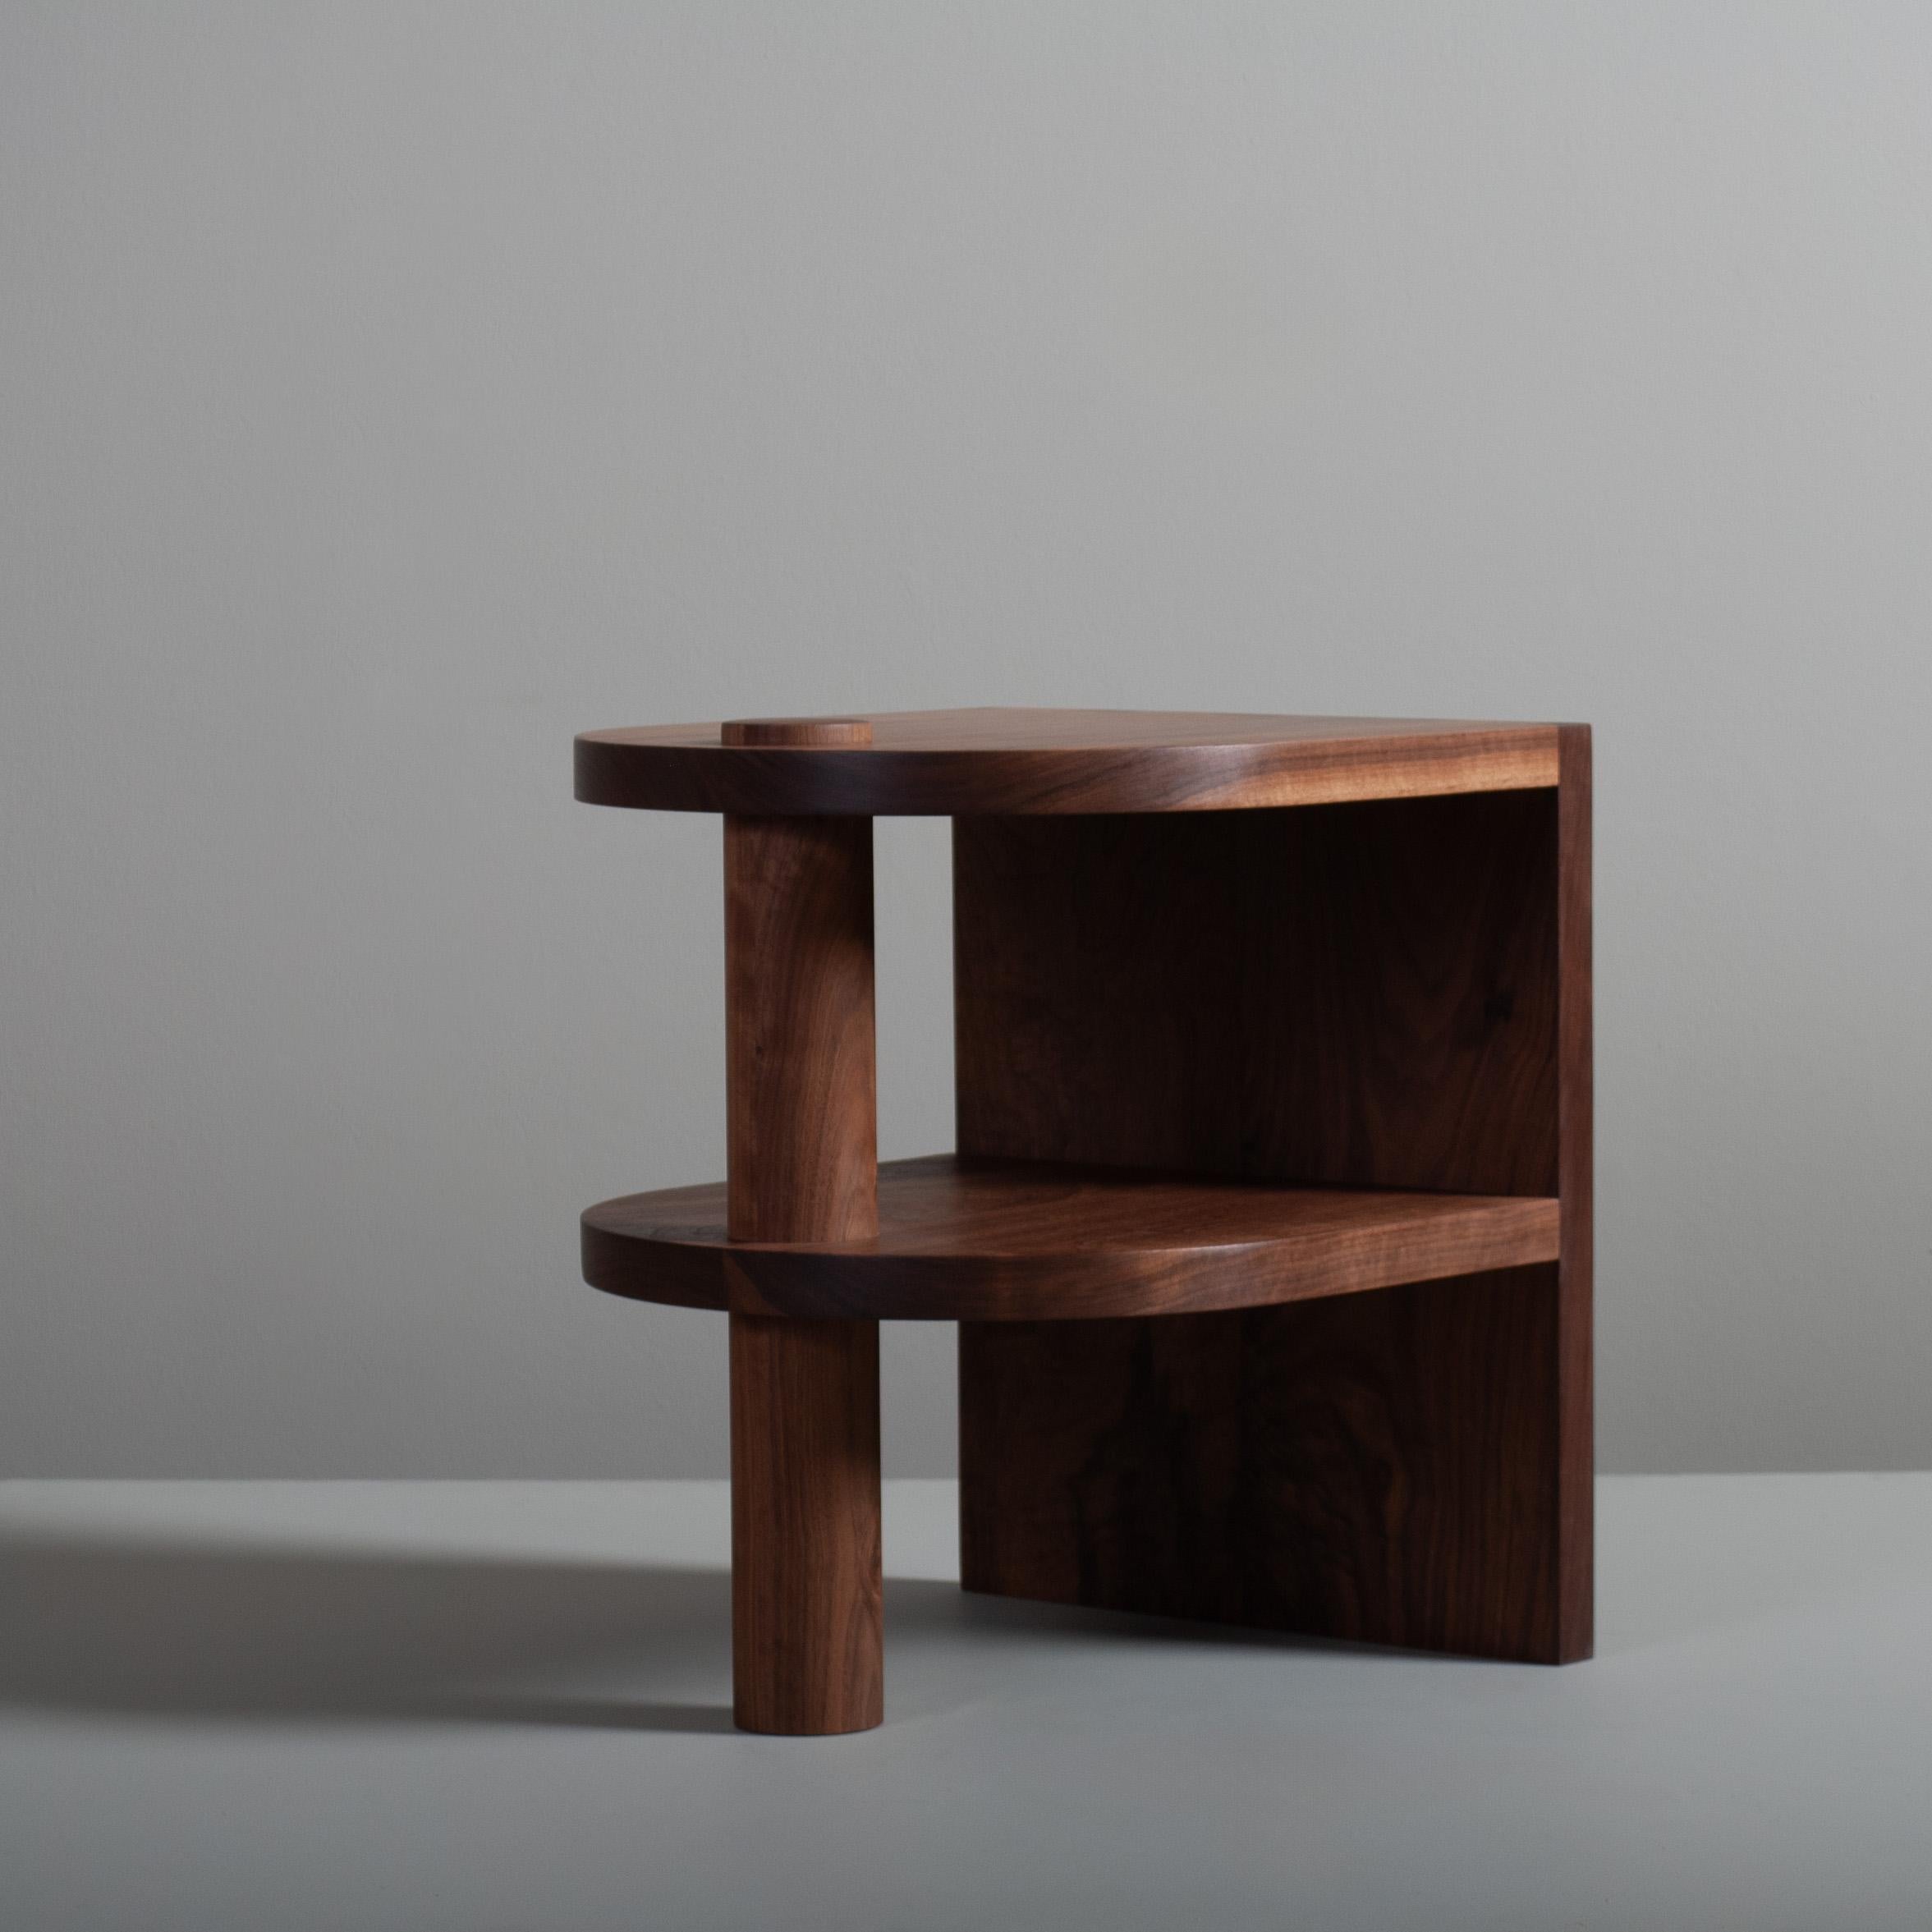 English Architectural Handcrafted Walnut End Table For Sale